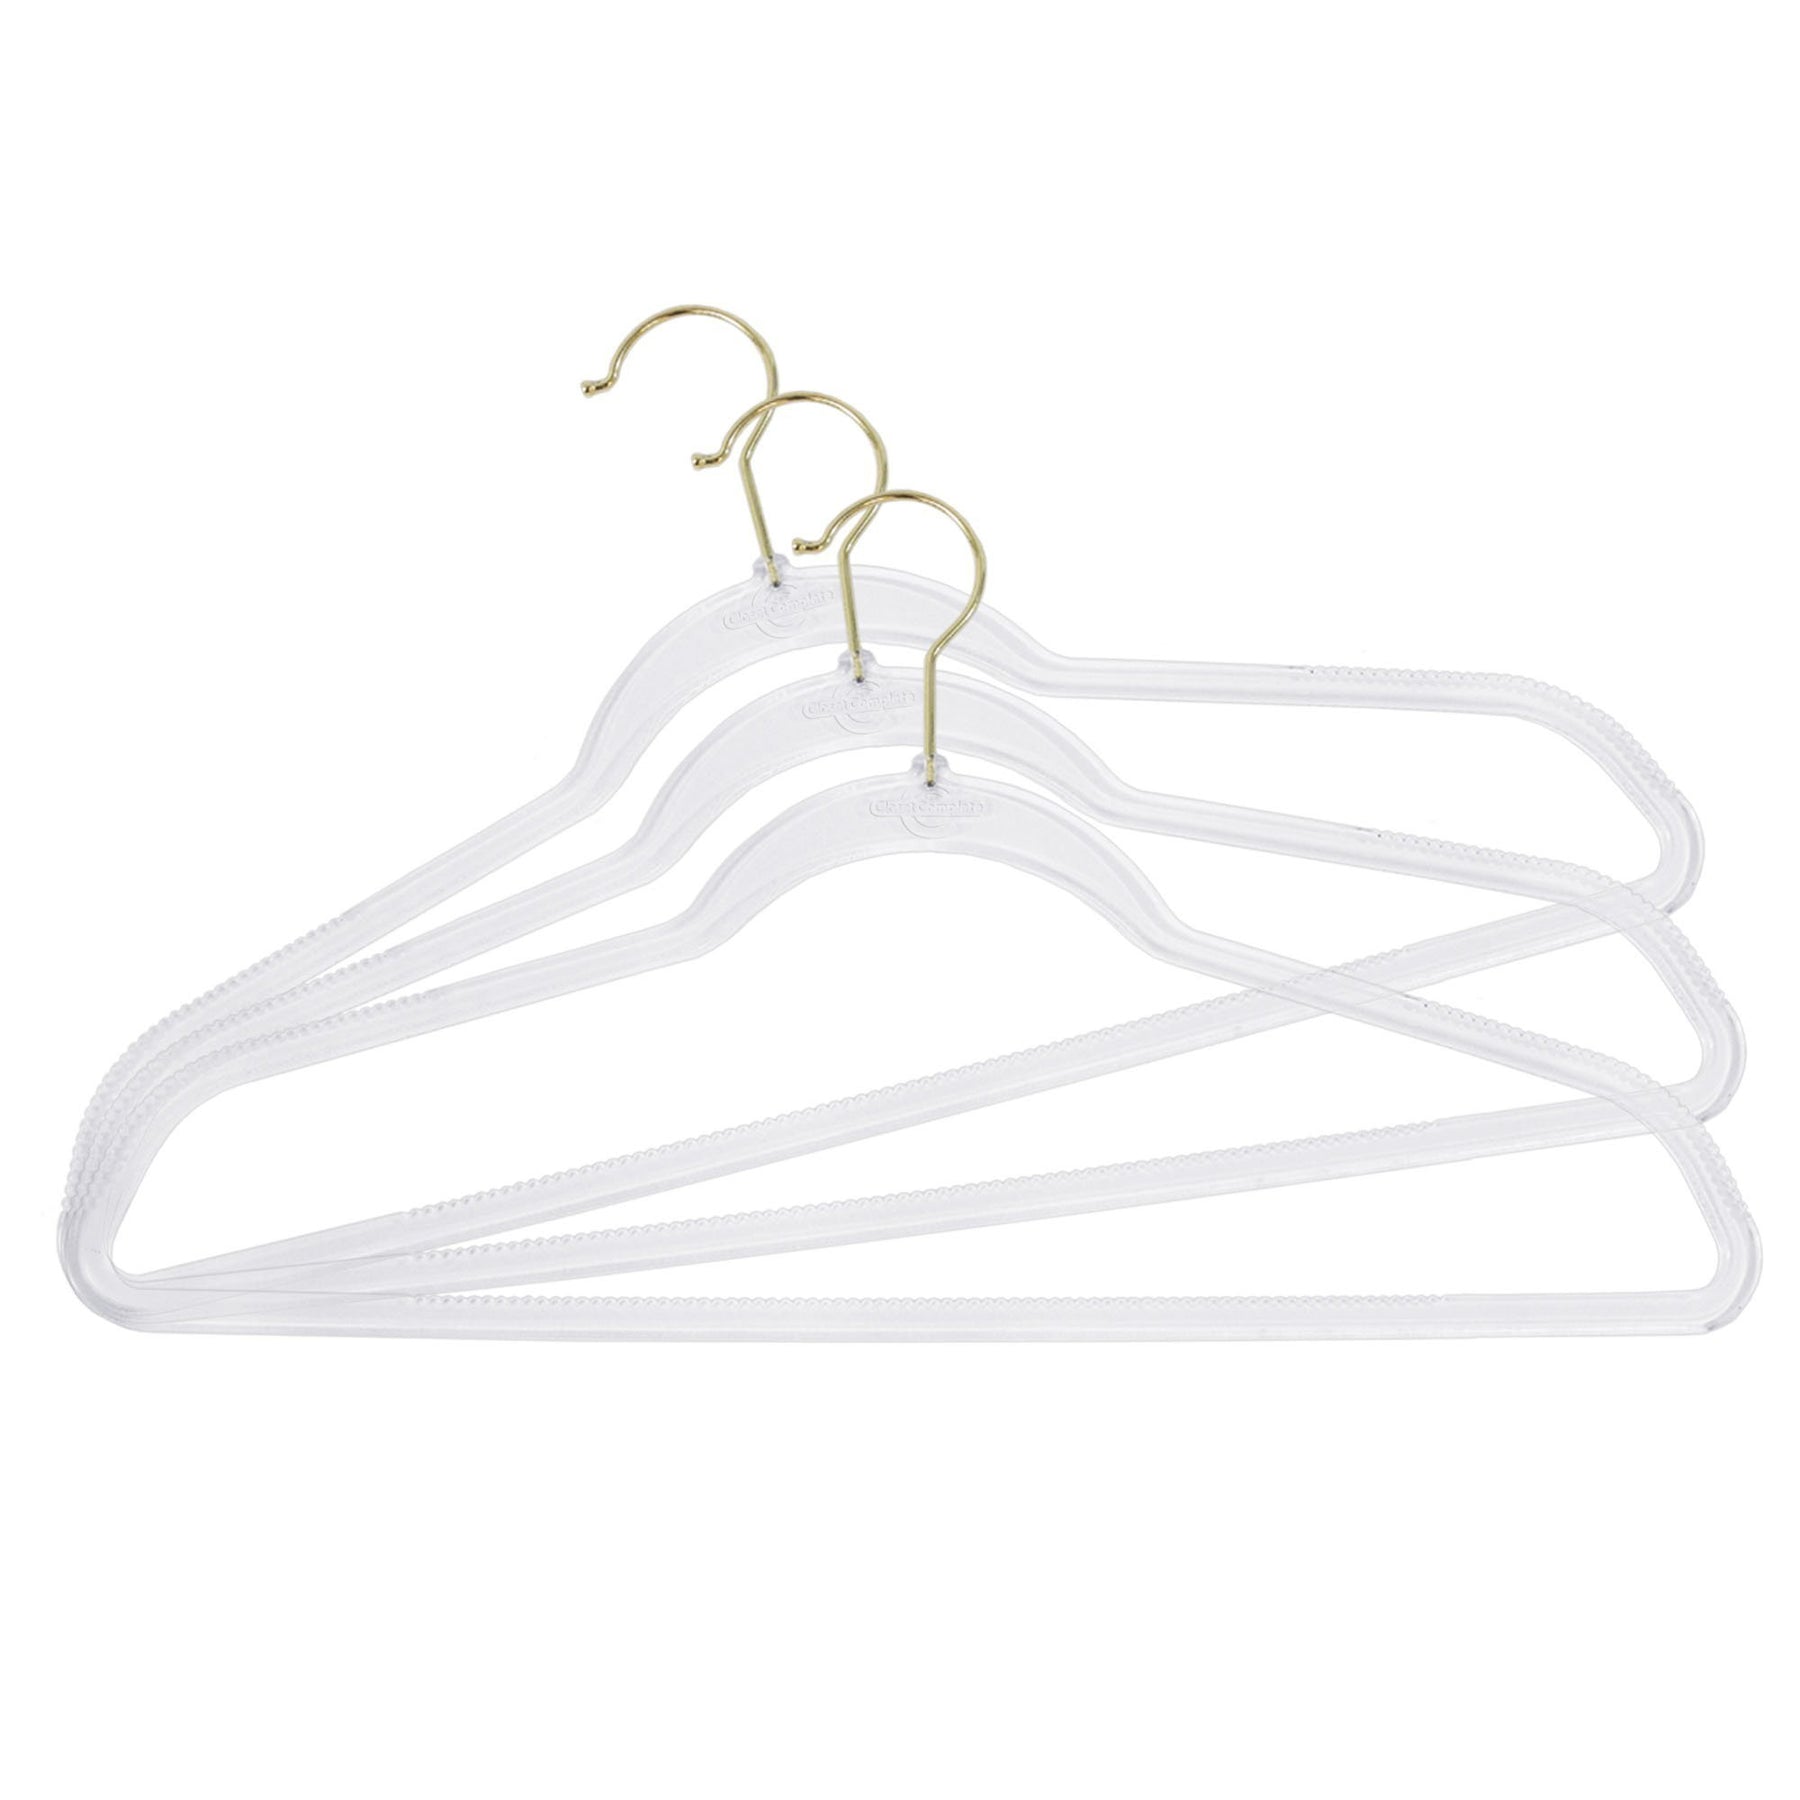 40 45cm Non Slip Hangers Glitter Transparent Hanger Plastic Clothes Hanger  Invisible Wardrobe Washing Hanger Wholesale QW8988 From Easy_deal, $1.69